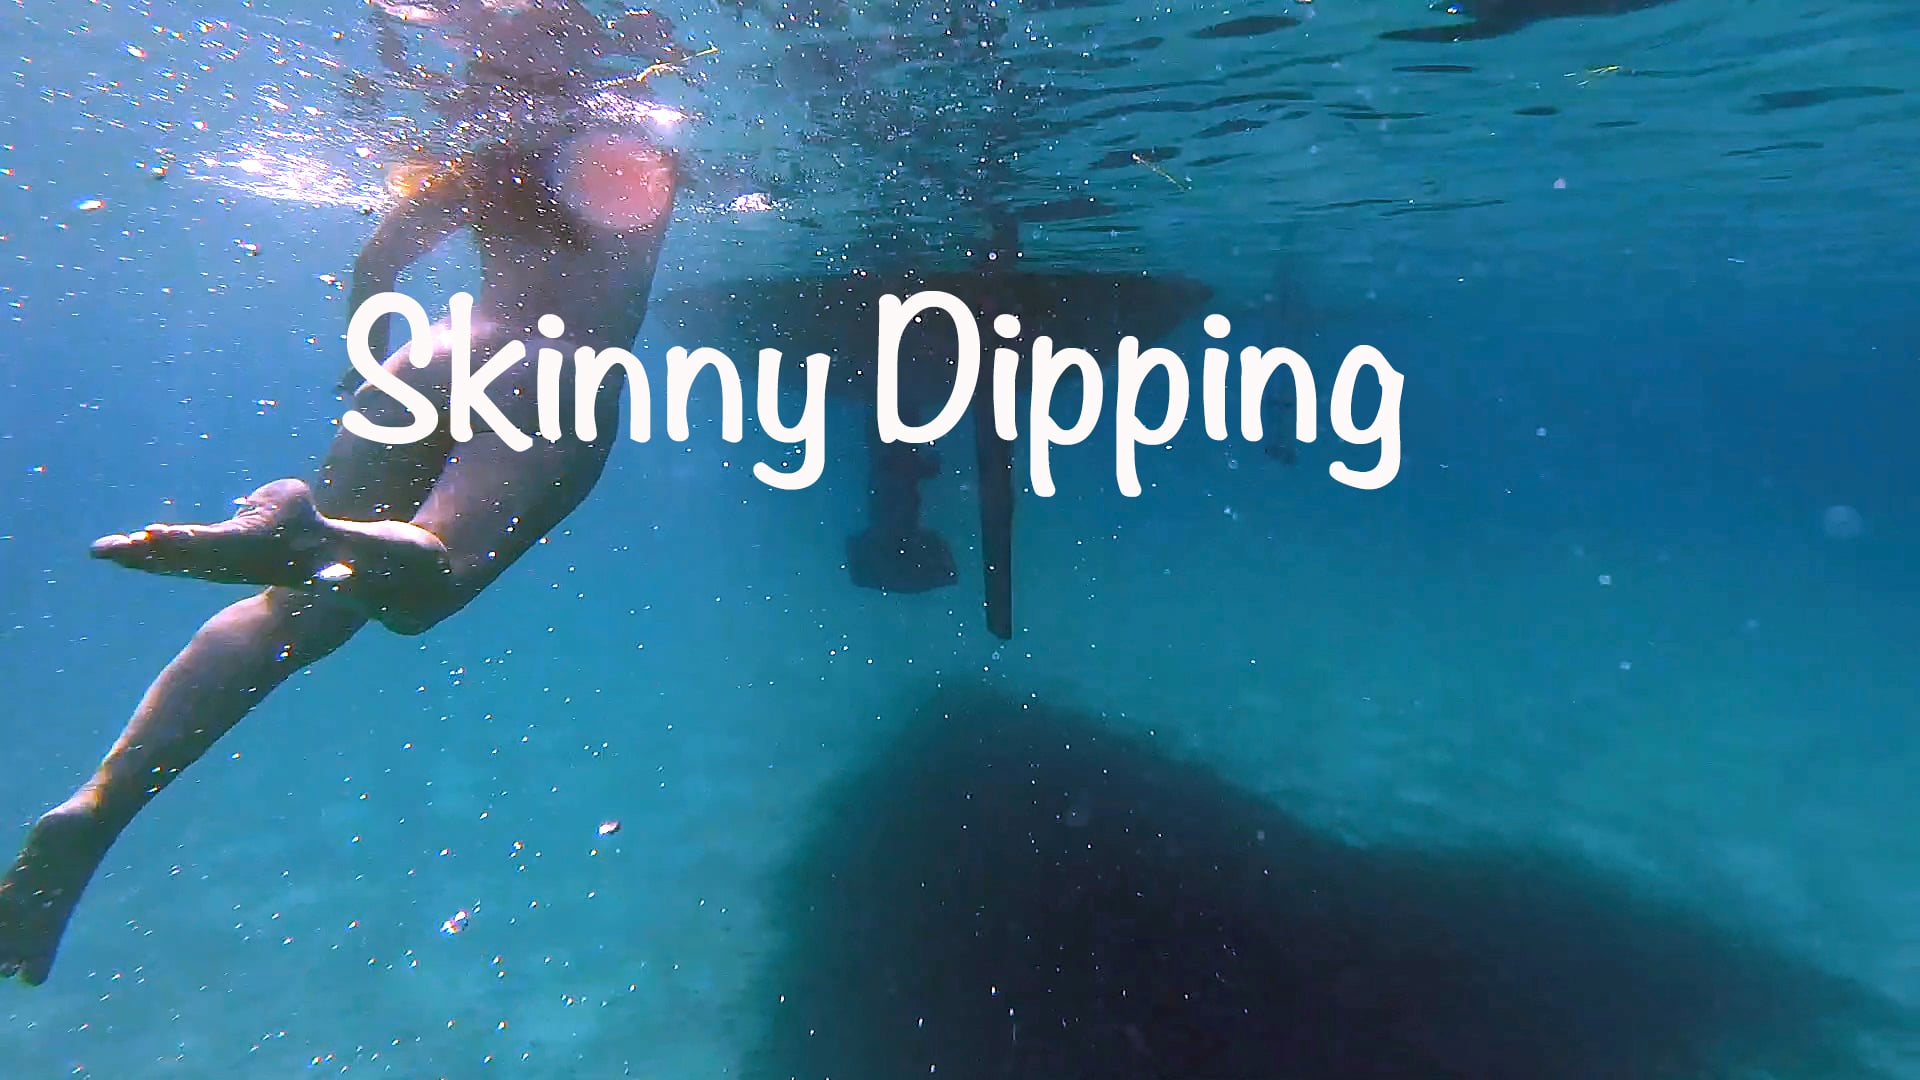 Ep 34 Skinny Dipping Uncensored Youtube version on Vimeo